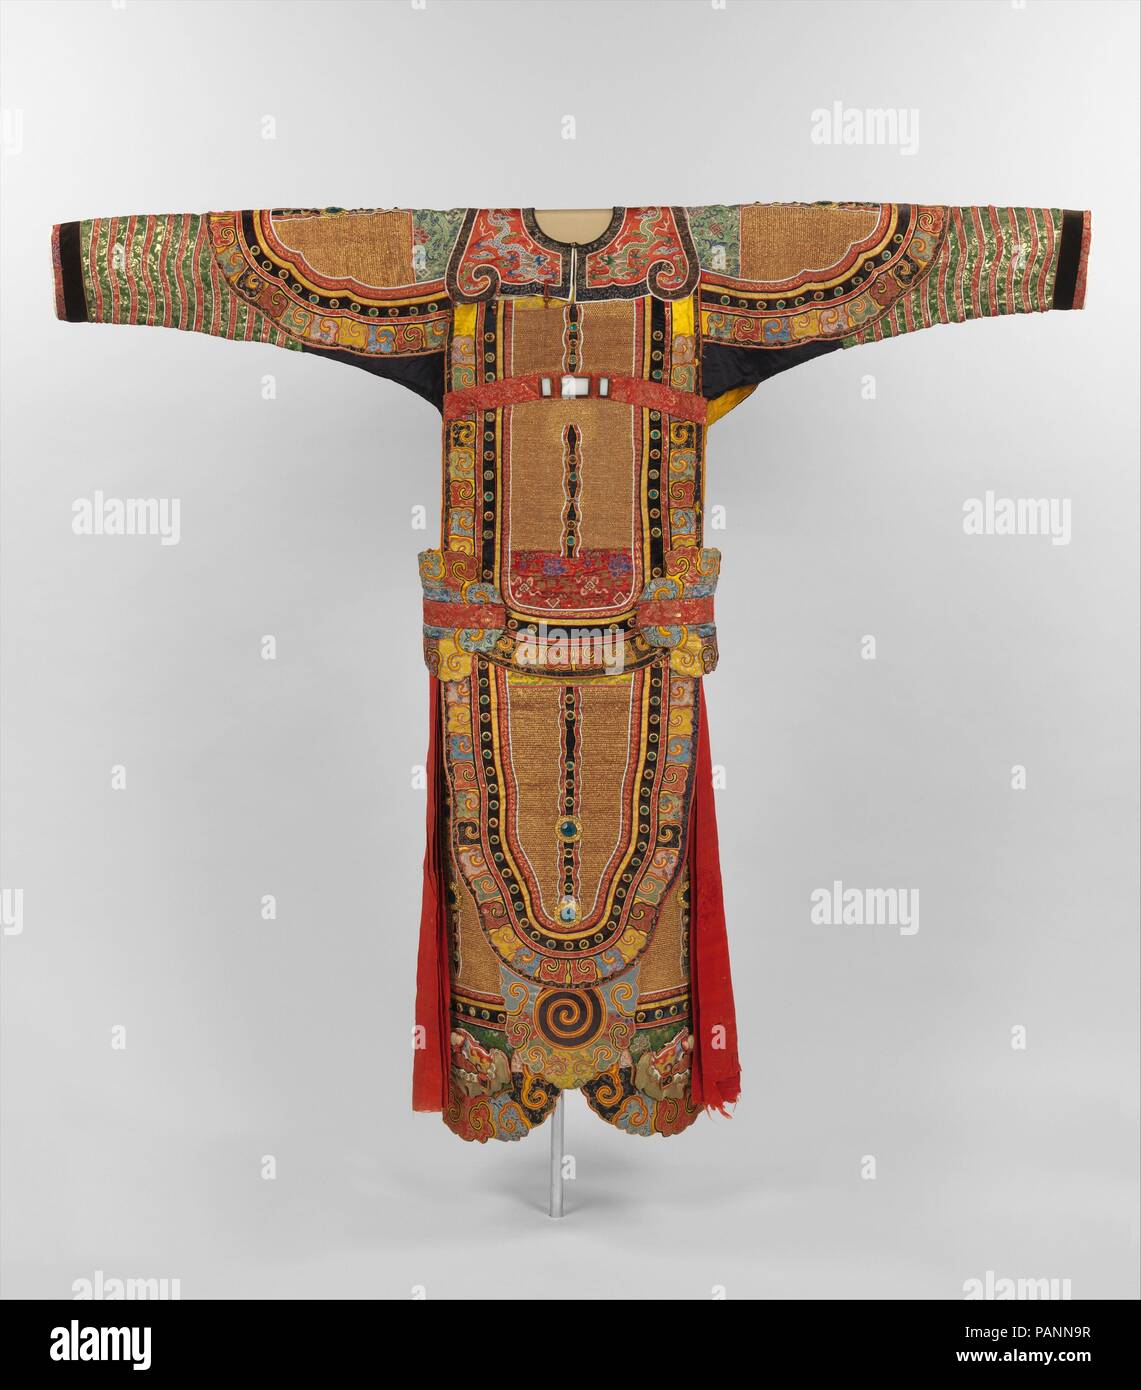 Theatrical Costume for the Role of a Warrior. Culture: China. Dimensions: Overall (a): 59 5/8 x 68 3/4 in. (151.4 x 174.6 cm)  Overall (b): 37 1/2 x 35 in. (95.3 x 88.9 cm). Date: 18th century.  This costume is for the role of a high-ranking warrior.  A nearly identical costume is in the Qing court collection of theatrical costumes in the Palace Museum, Beijing. Museum: Metropolitan Museum of Art, New York, USA. Stock Photo